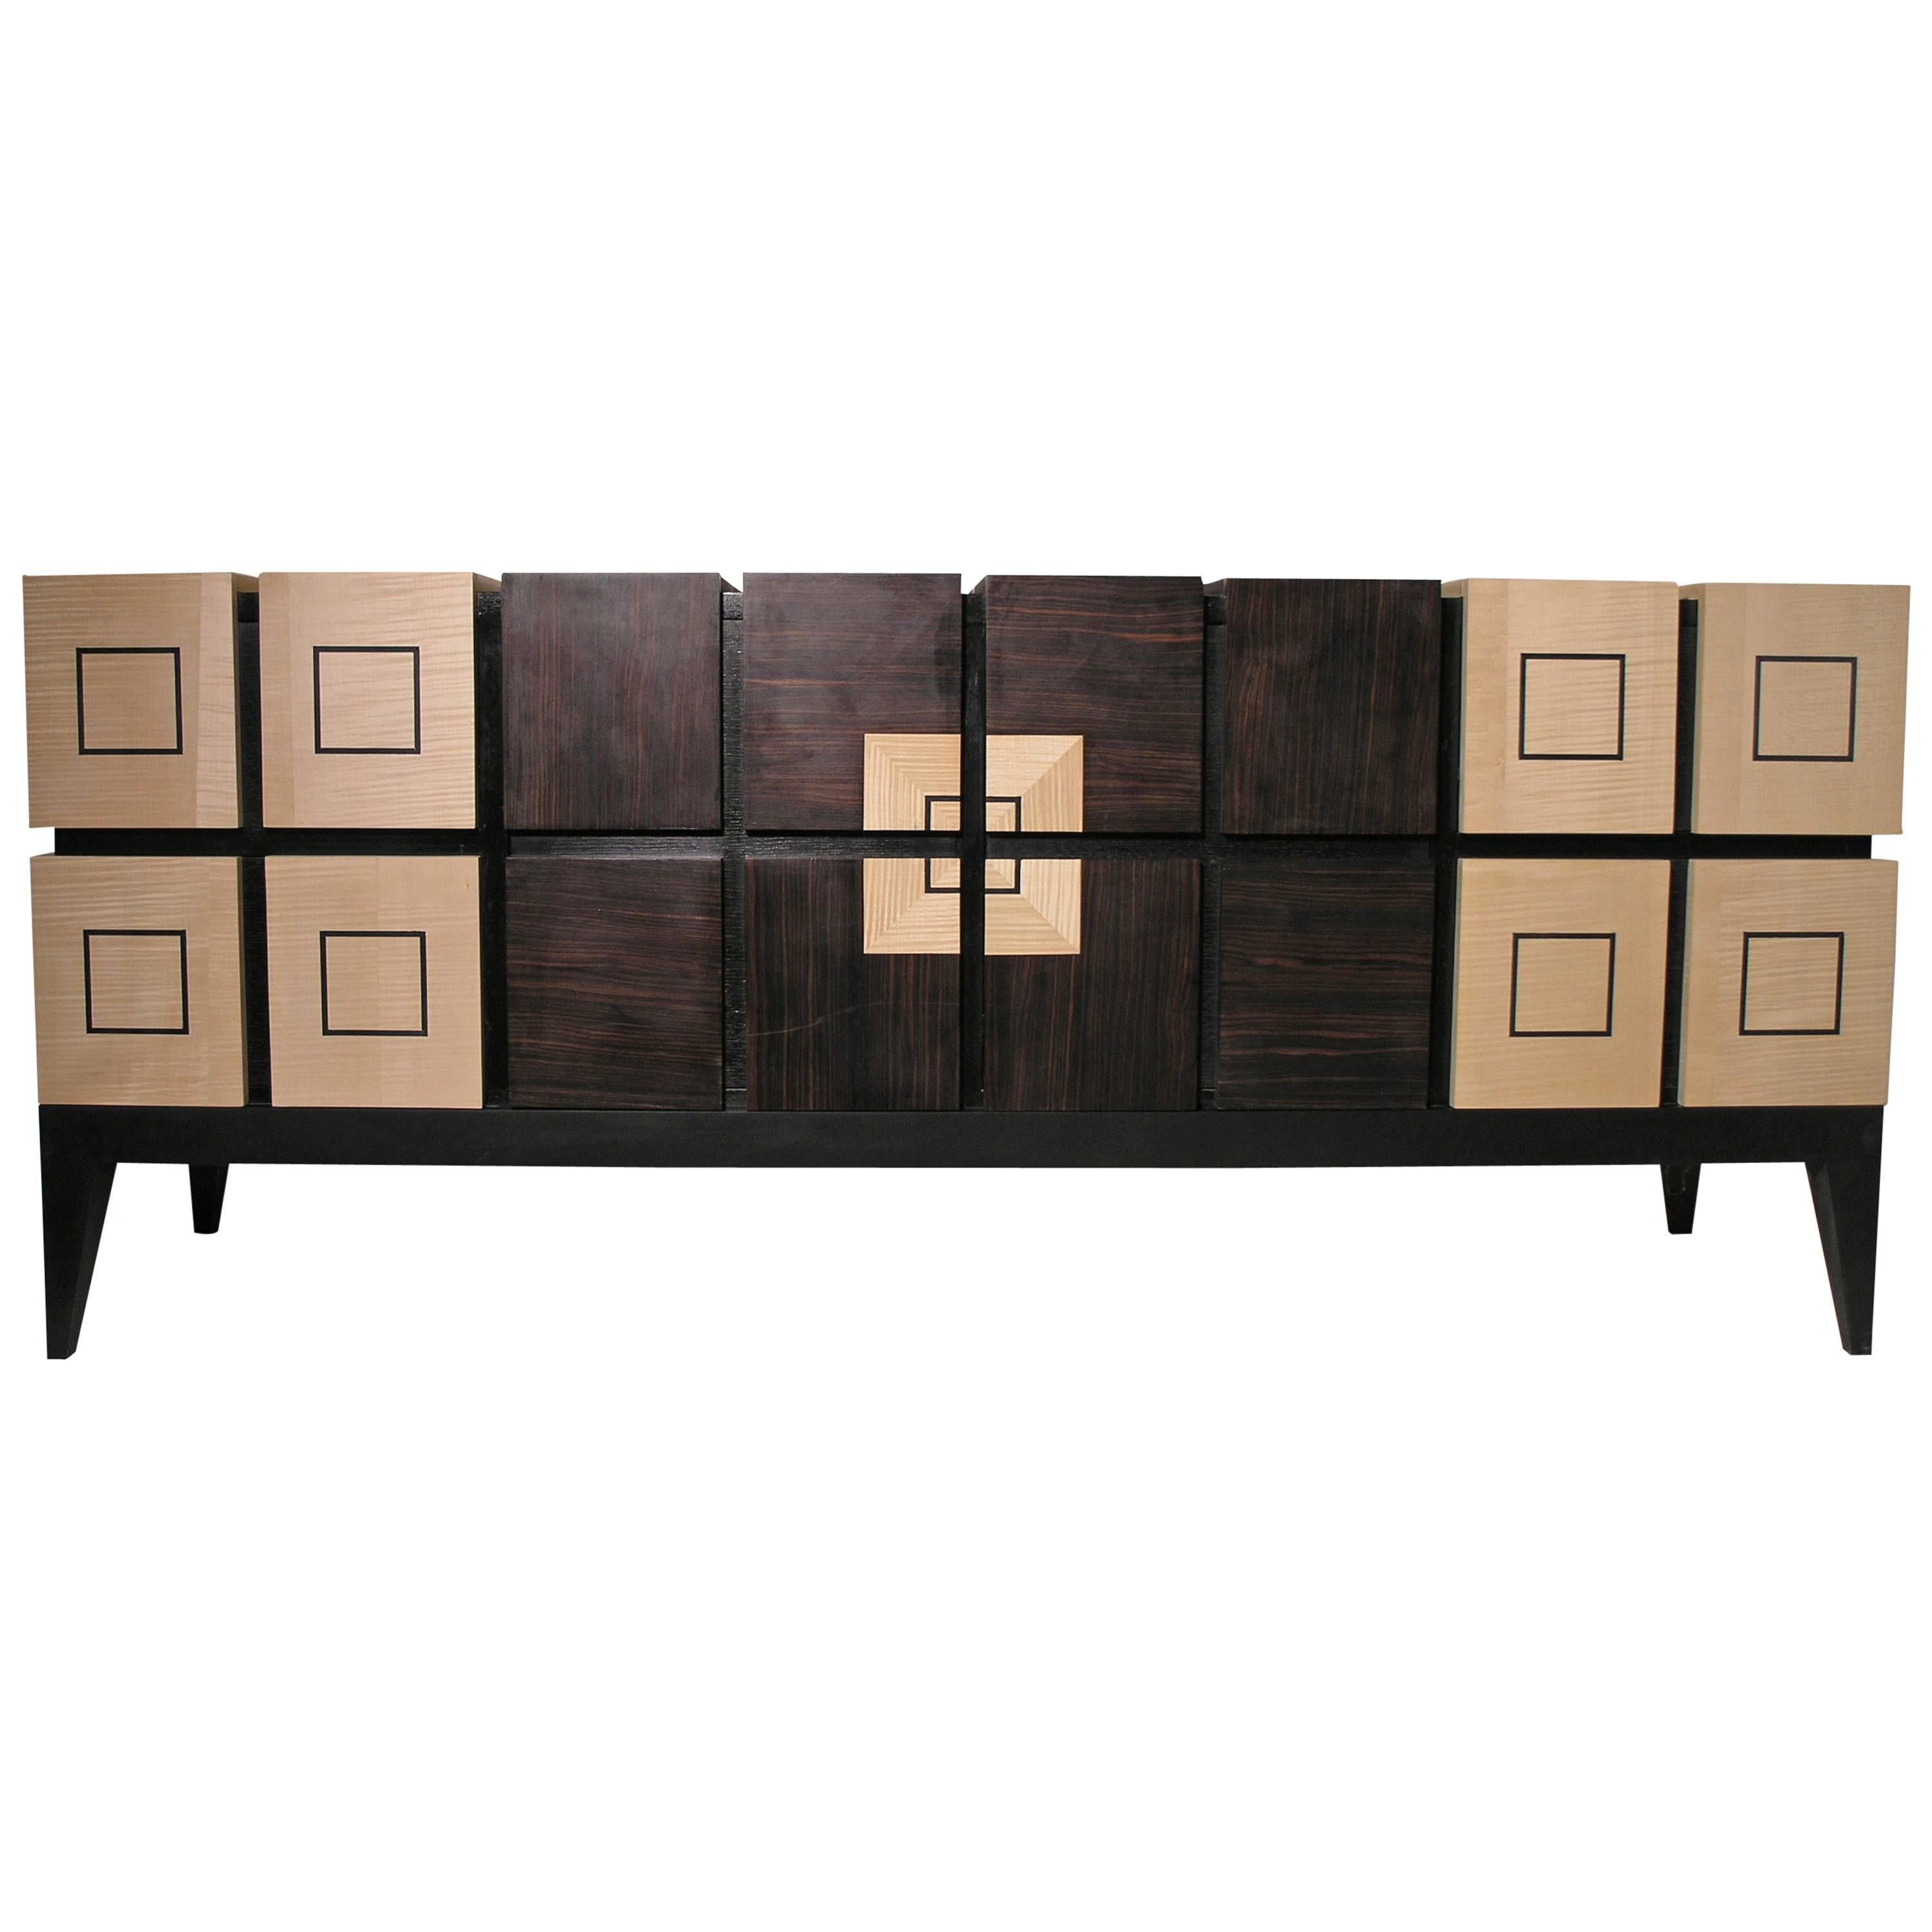 Chest of Drawers “Bar” in Sycomore and Ebony by Aymeric Lefort